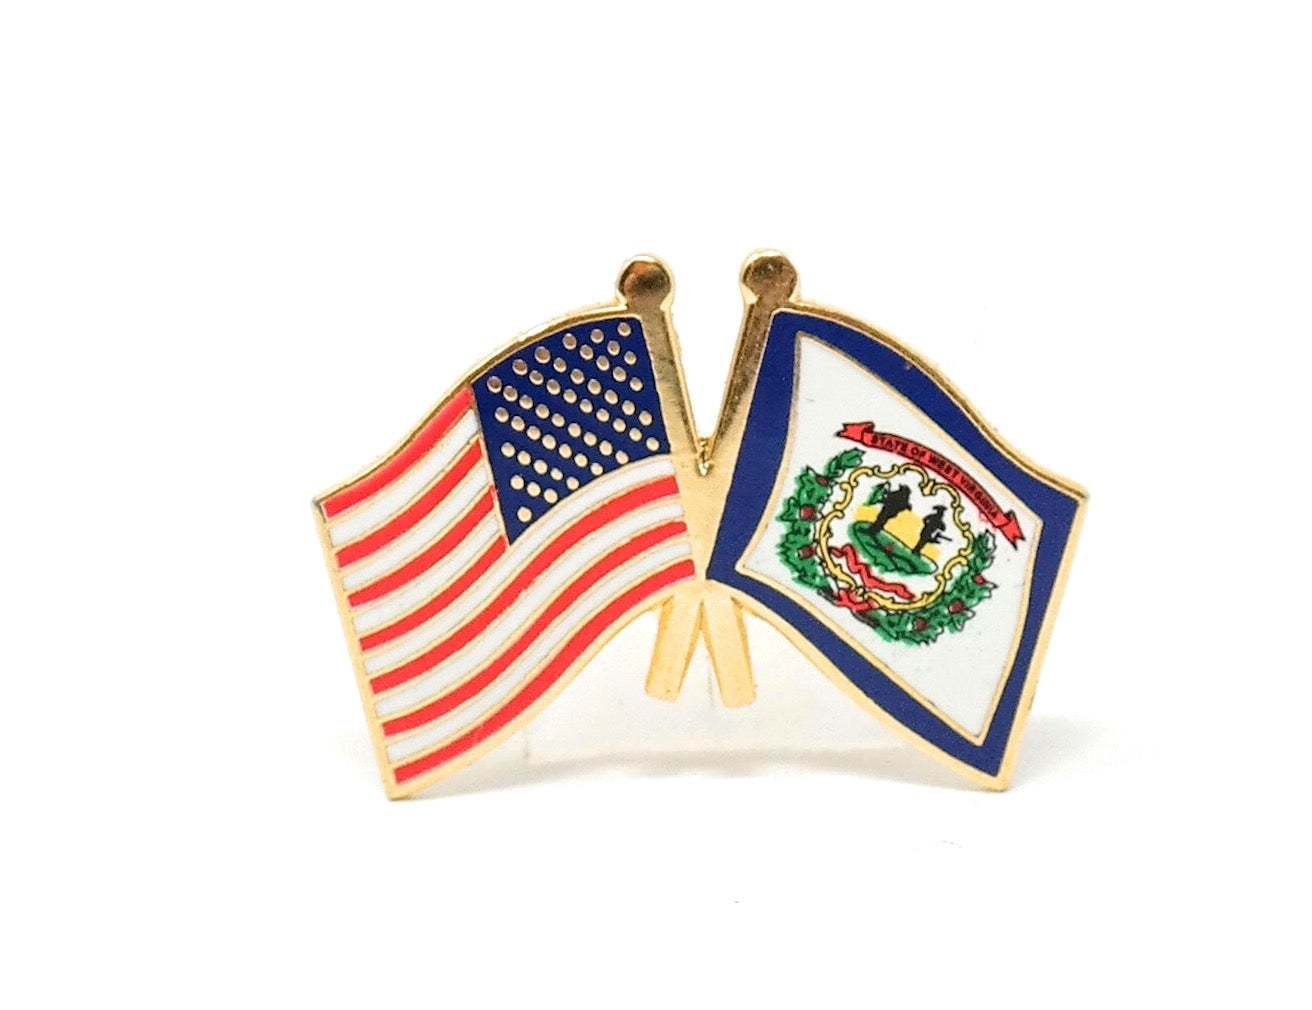 West Virginia State & USA Friendship Flags Lapel Pin